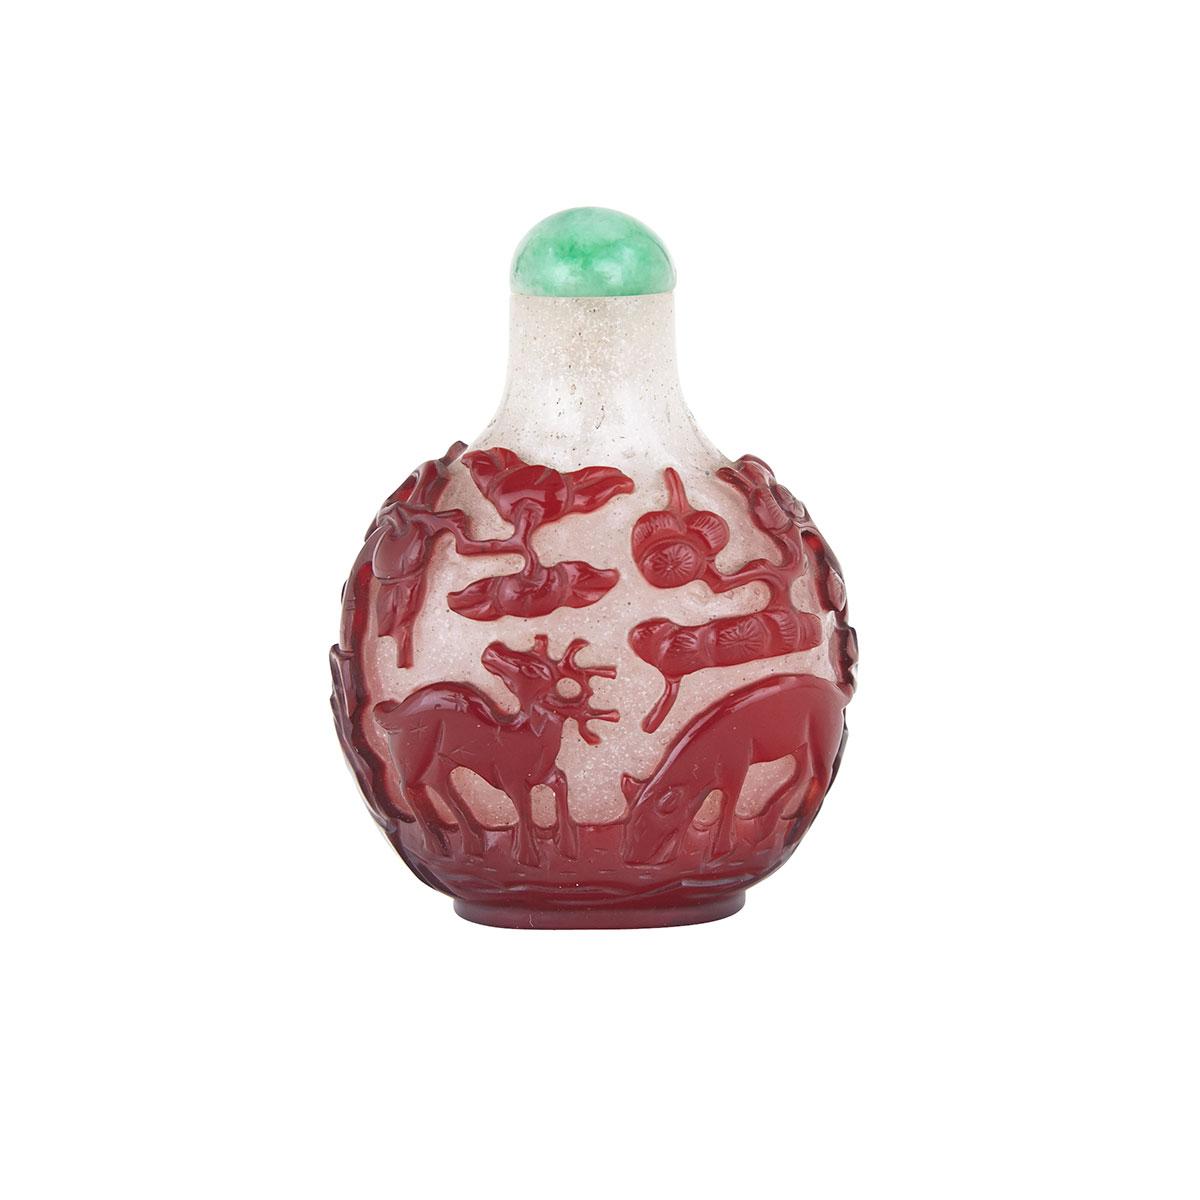 Well-Carved Red Overlay White Peking Glass Snuff Bottle, Circa 1800-1850